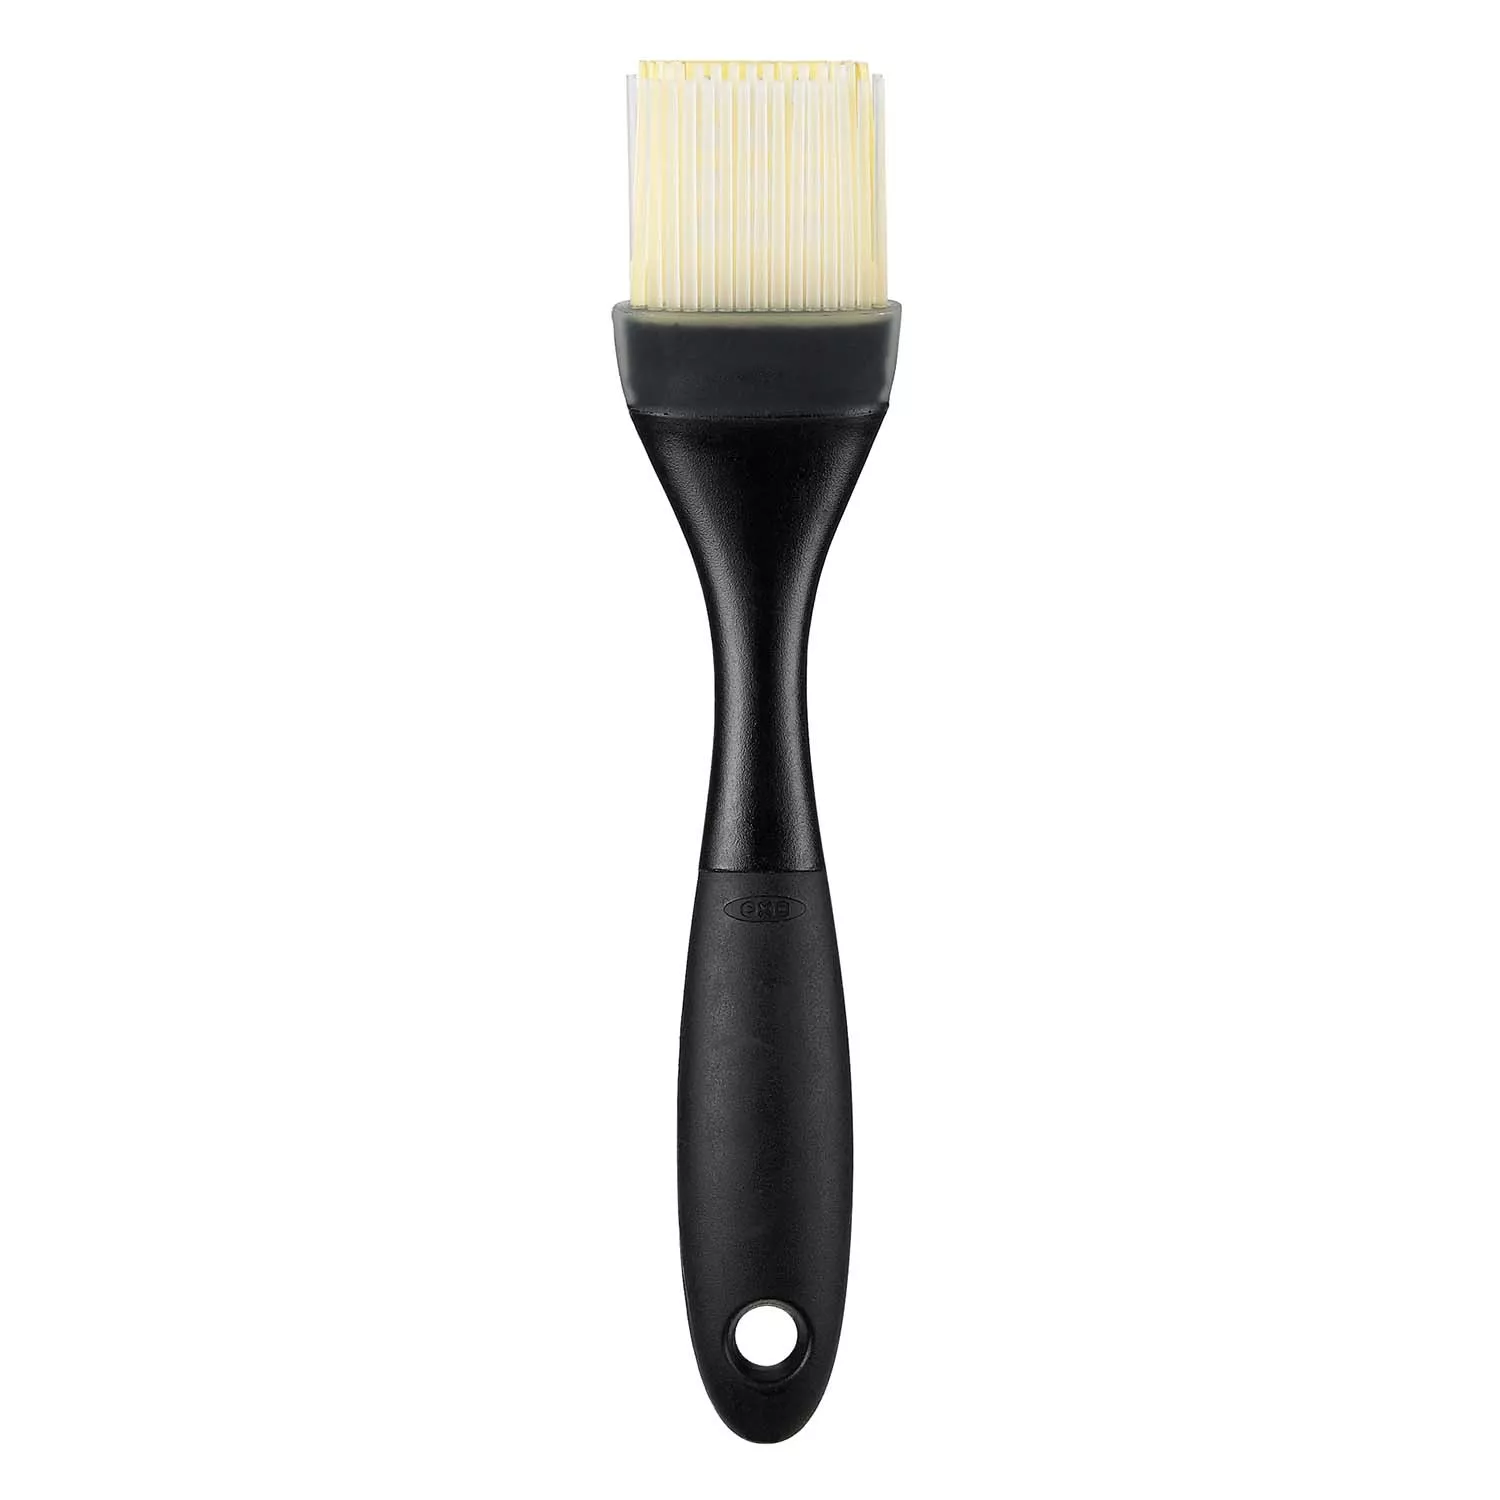 All-Clad Silicone Tools Pastry Brush